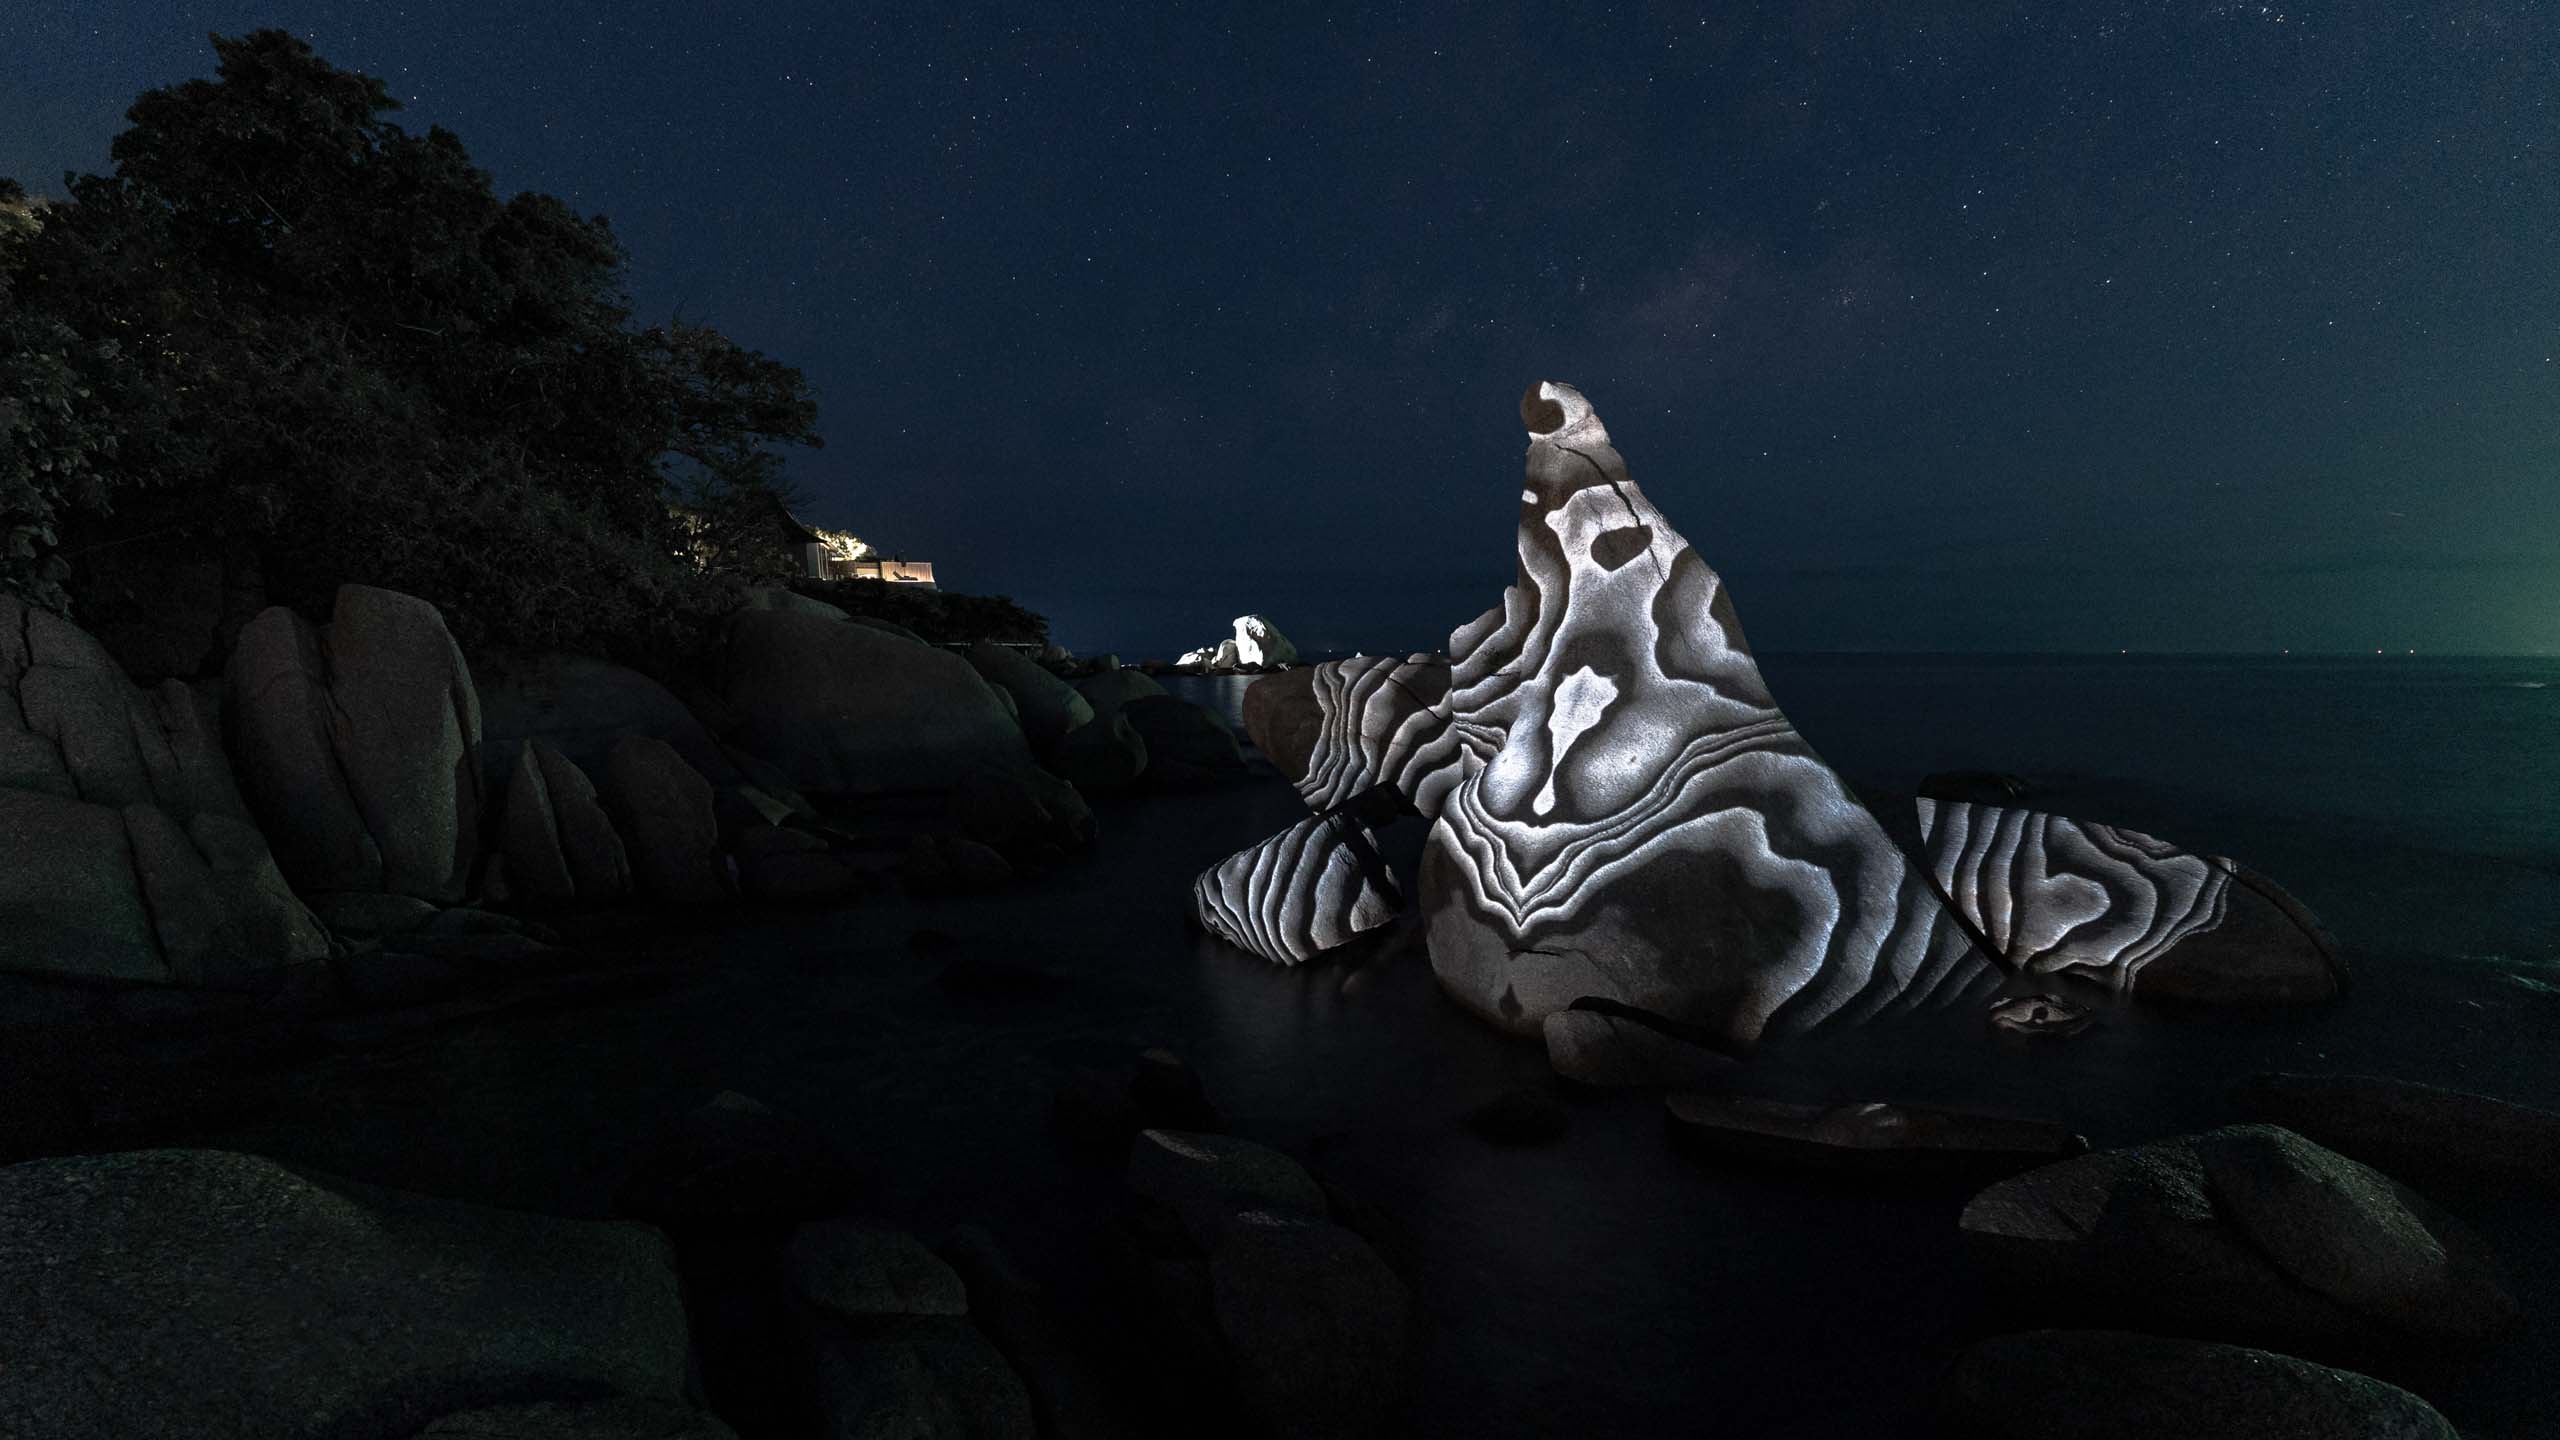 Projection mapping nature art on a rock with beautiful visuals by Philipp Frank